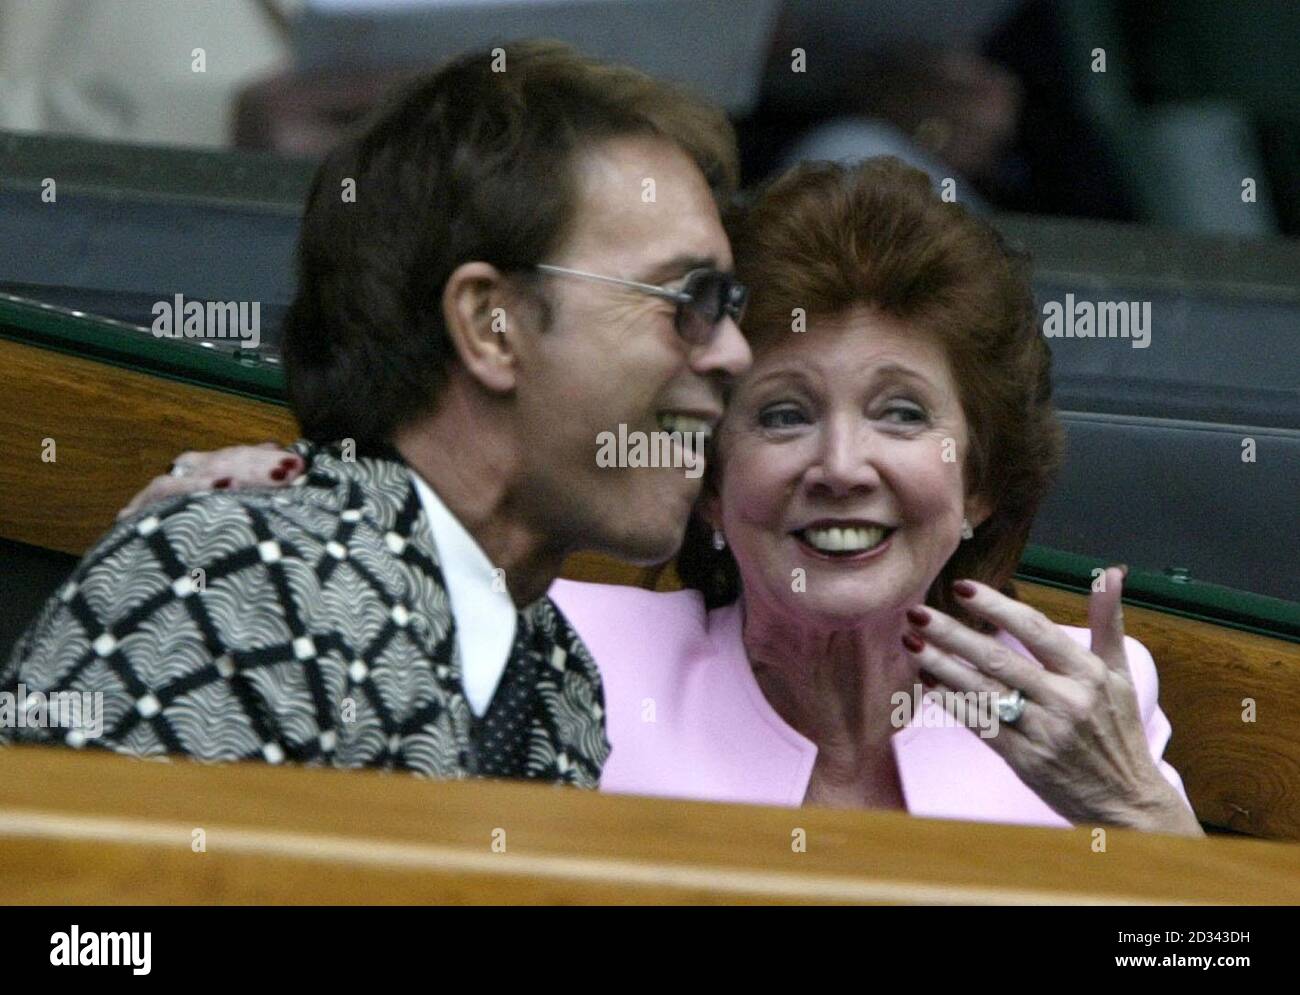 EDITORIAL USE ONLY, NO MOBILE PHONE USE. Sir Cliff Richard and Cilla Black share ajoke as they sit in the royal box watching Venus Williams in action against fellow American Lindsay Davenport in the ladies quarter finals at the All England Lawn Tennis Championships at Wimbledon. Stock Photo